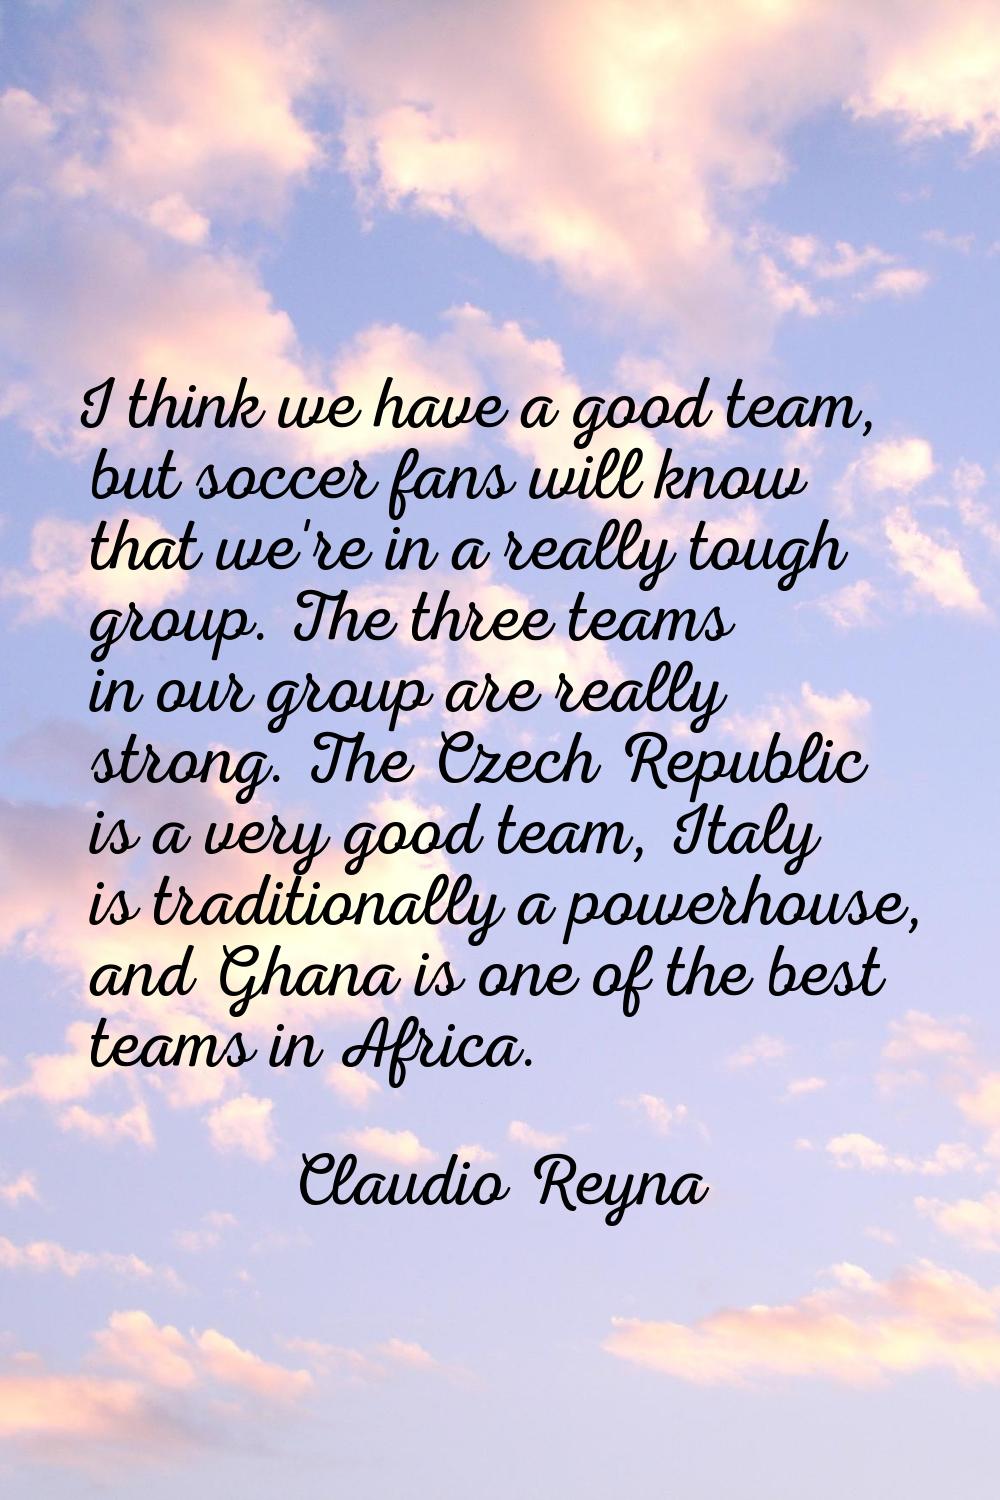 I think we have a good team, but soccer fans will know that we're in a really tough group. The thre